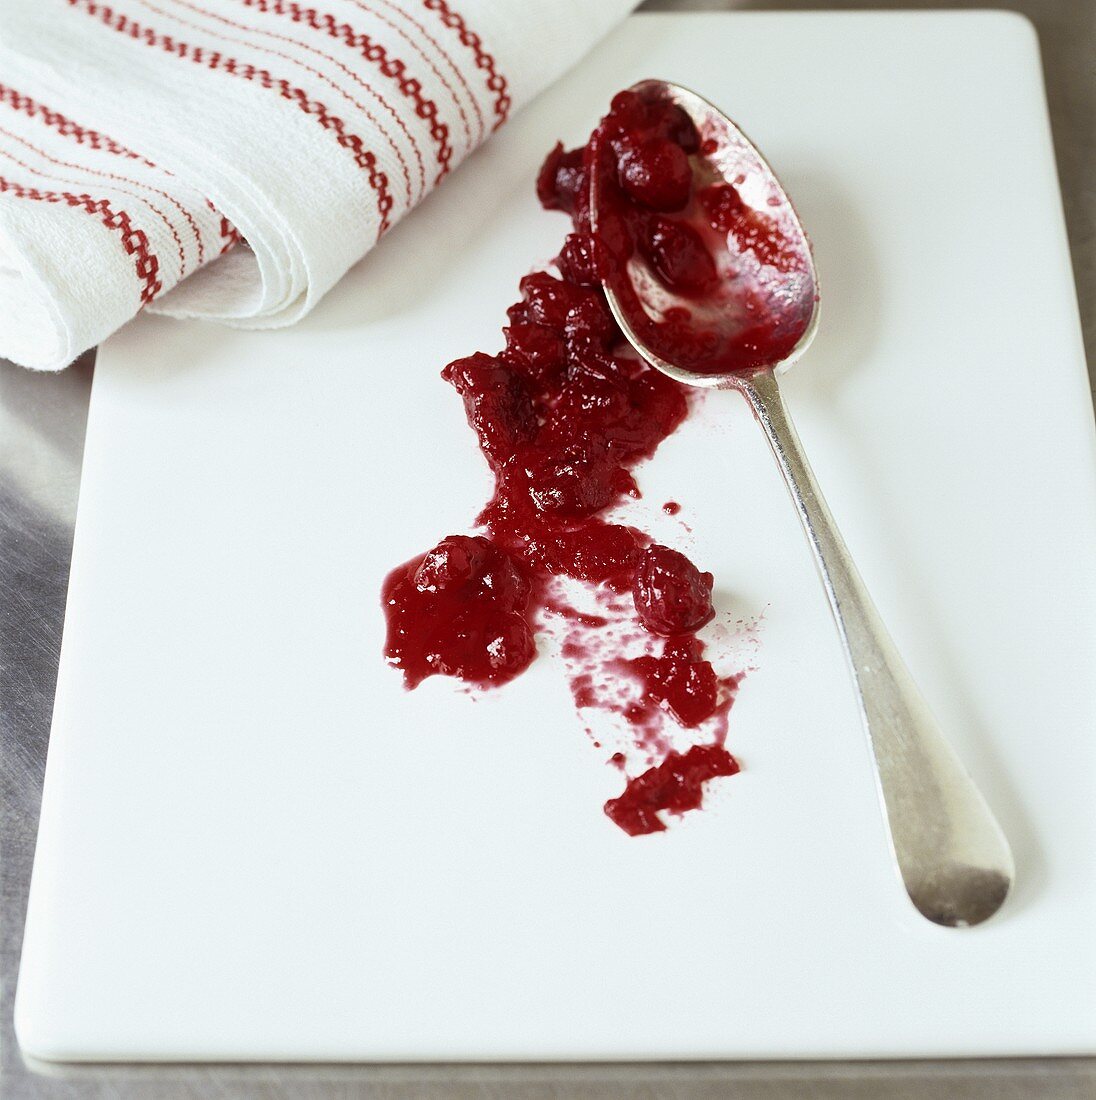 Cranberry sauce with spoon